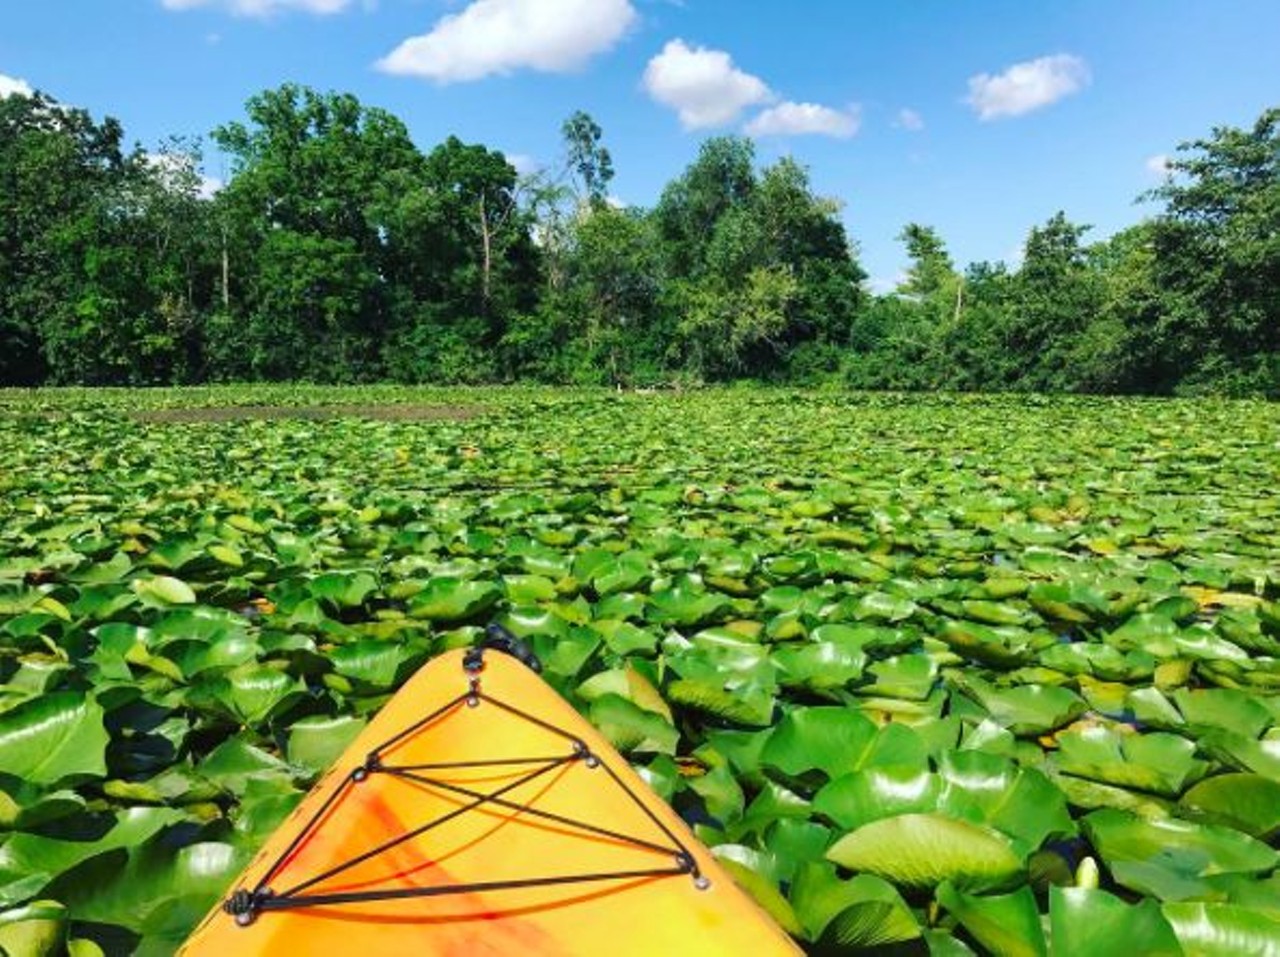 Gallup Park Ann Arbor
This Ann Arbor recreational area offers every activity imaginable, from hiking trails to fishing. Not only that, but its canoe livery offers canoe, two-person kayak, one-person kayak, children&#146;s kayak, paddleboat, and rowboat rentals in addition to concessions, merchandise and &#147;river-themed programs.&#148;
Photo via IG user @lastnameeverfirstname